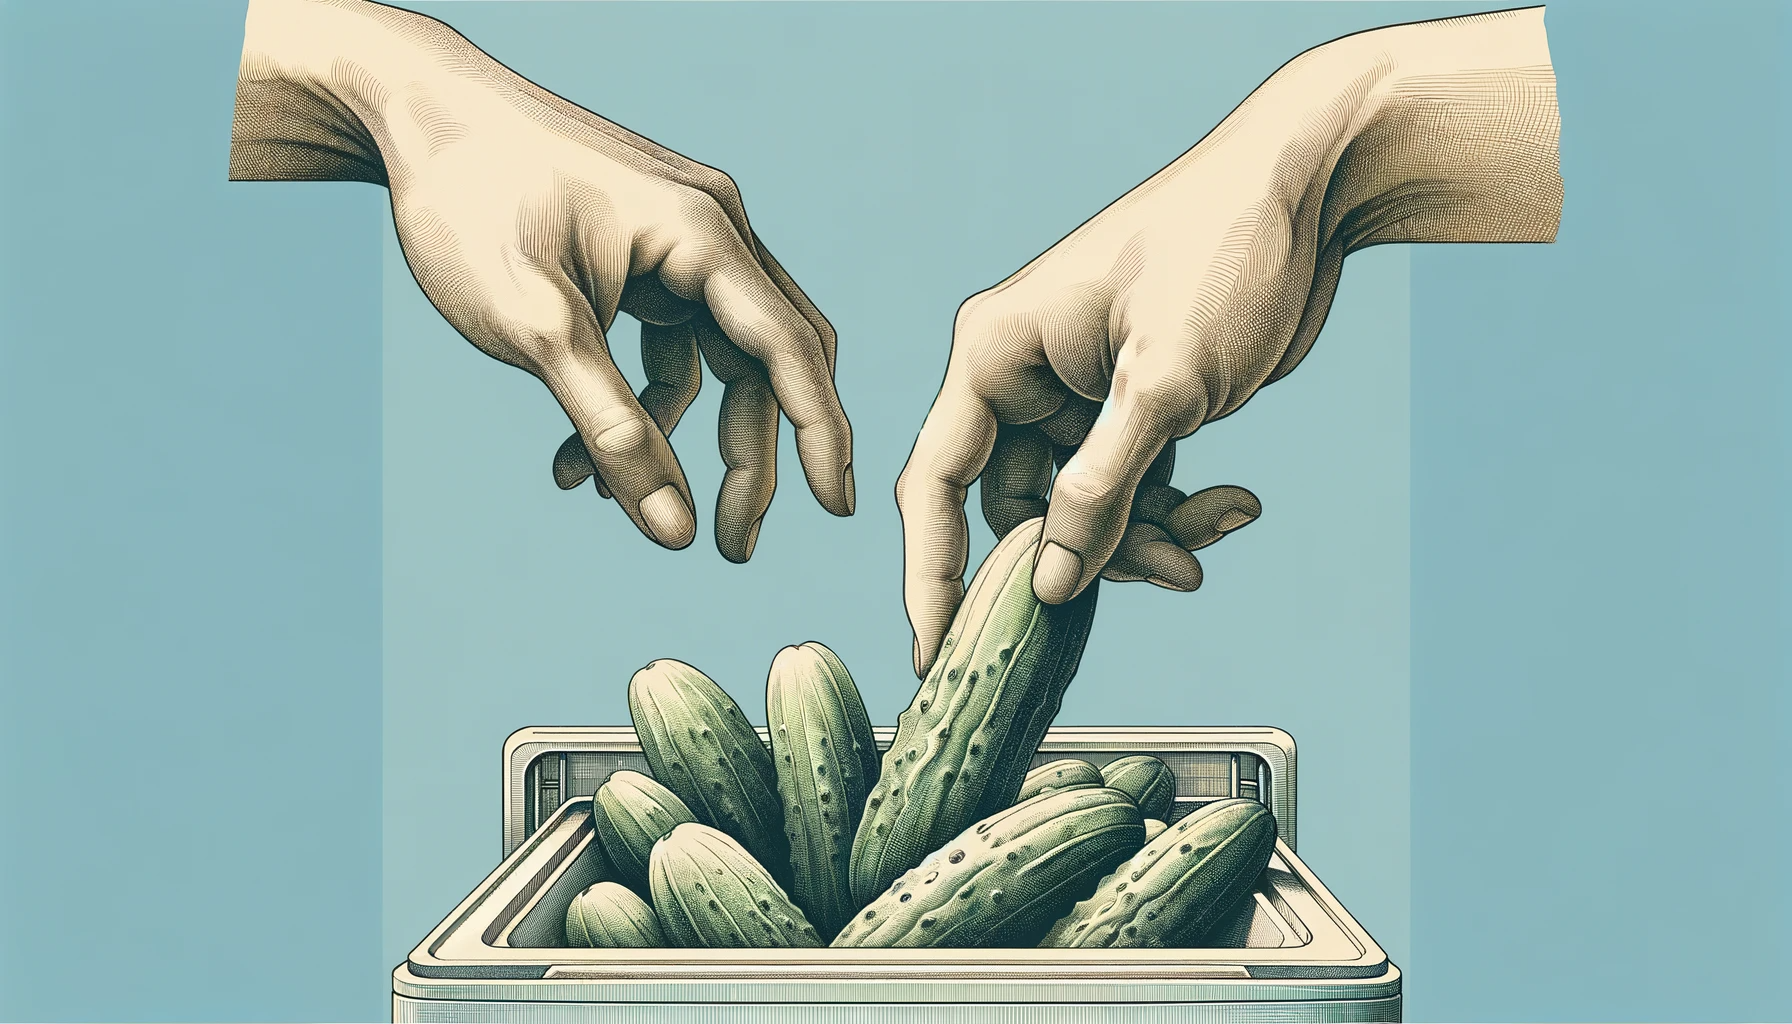 Frozen Cucumbers Being Placed Into A Freezer By Human Hands Set Against A Light Blue Background